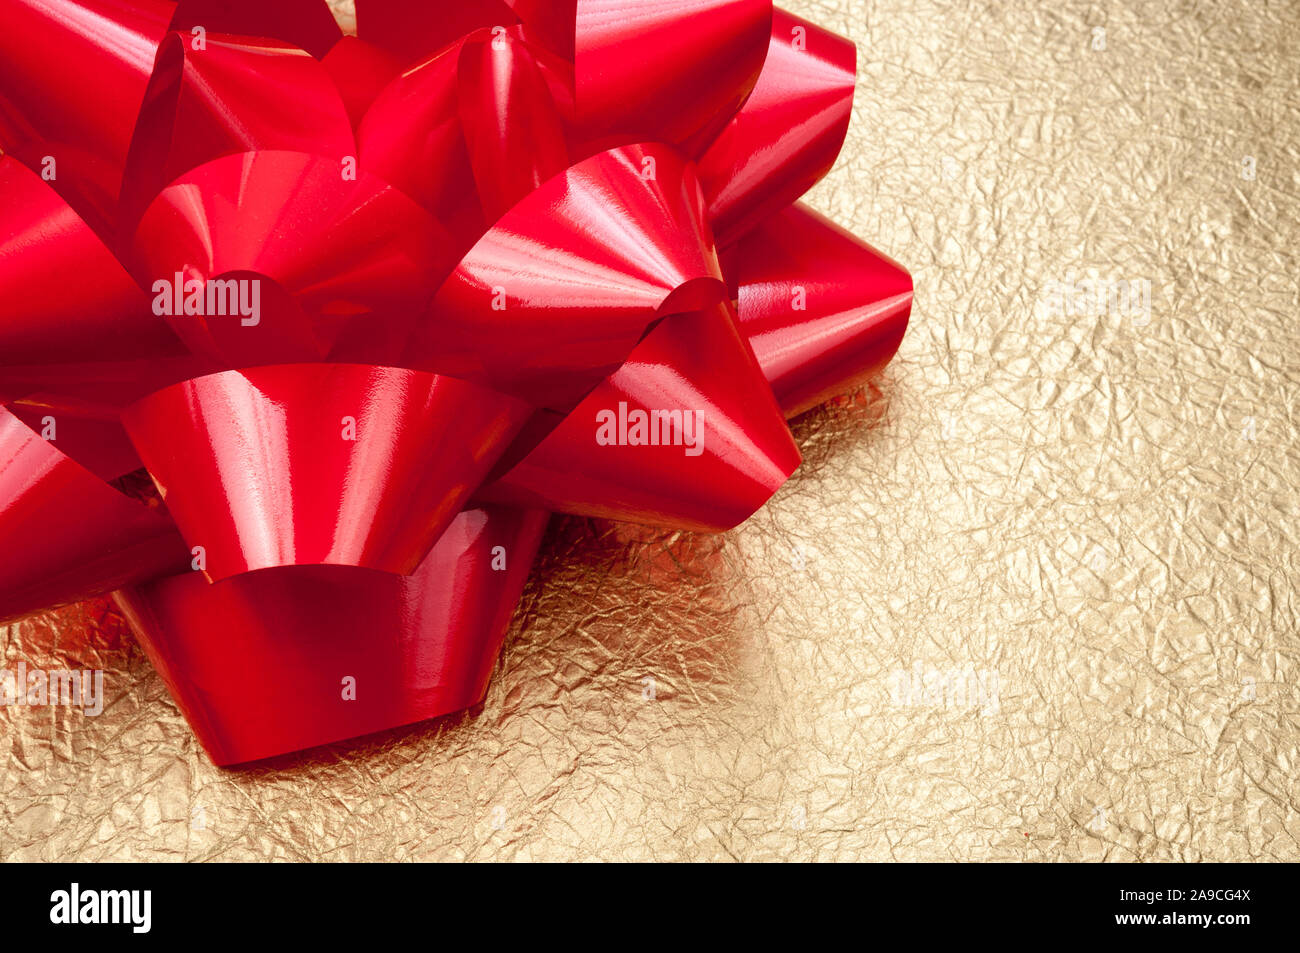 Christmas present wrapped in metallic gold holiday paper topped by a shiny red bow Stock Photo